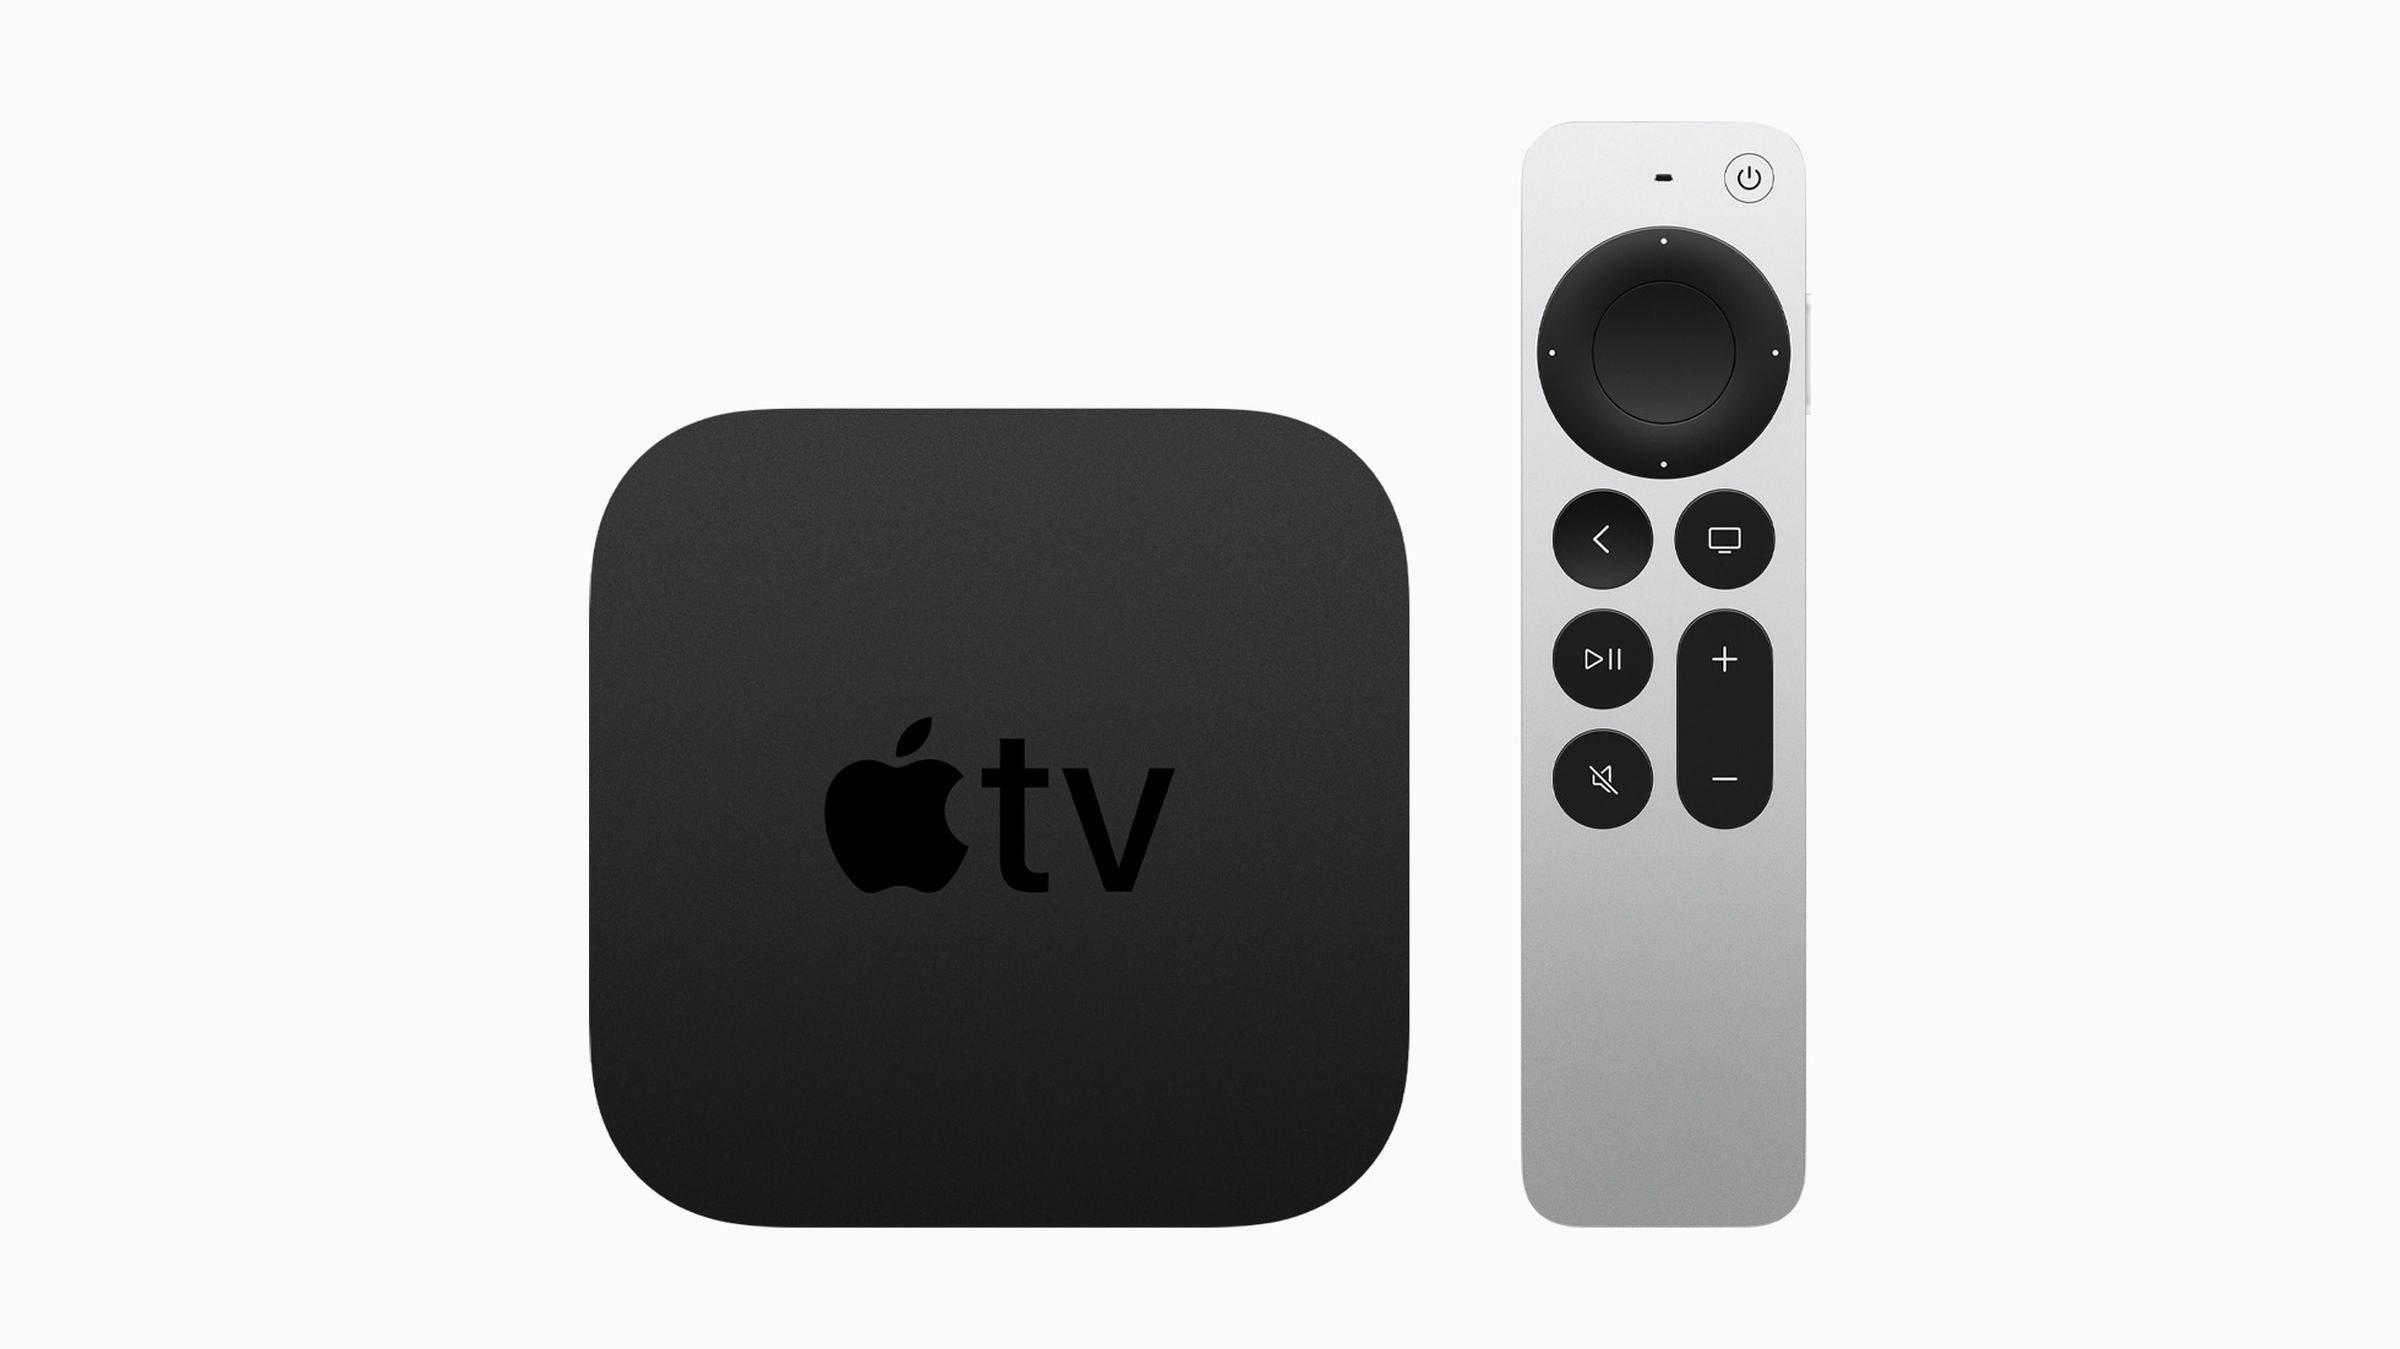 The new remote alongside the new Apple TV 4K.